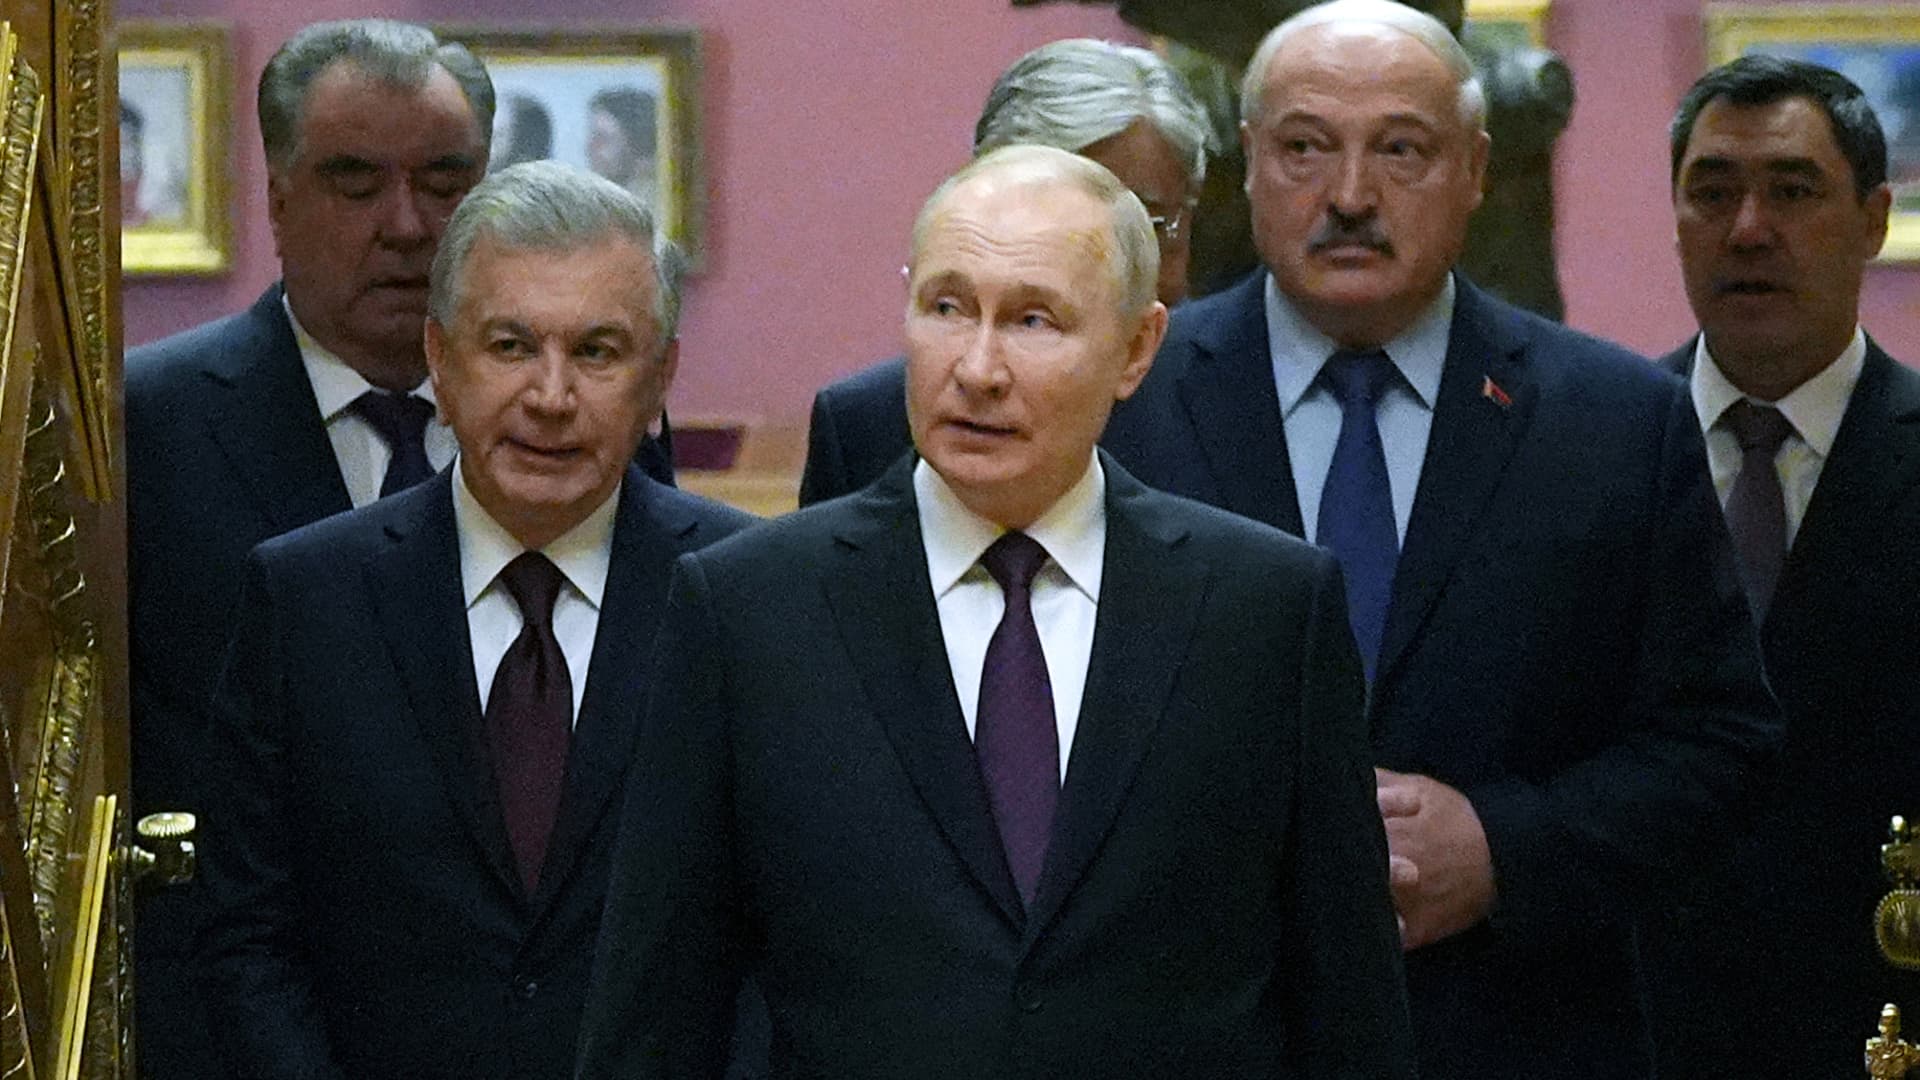 Russia's President Vladimir Putin (center), Tajikistan's President Emomali Rahmon (left), Uzbekistan's President Shavkat Mirziyoyev (second from left), Kyrgyzstan's President Sadyr Japarov (right) and Belarus' President Alexander Lukashenko enter a hall of the State Russian Museum during an informal summit of the heads of state of the Commonwealth of Independent States in St. Petersburg on Dec. 27, 2022.